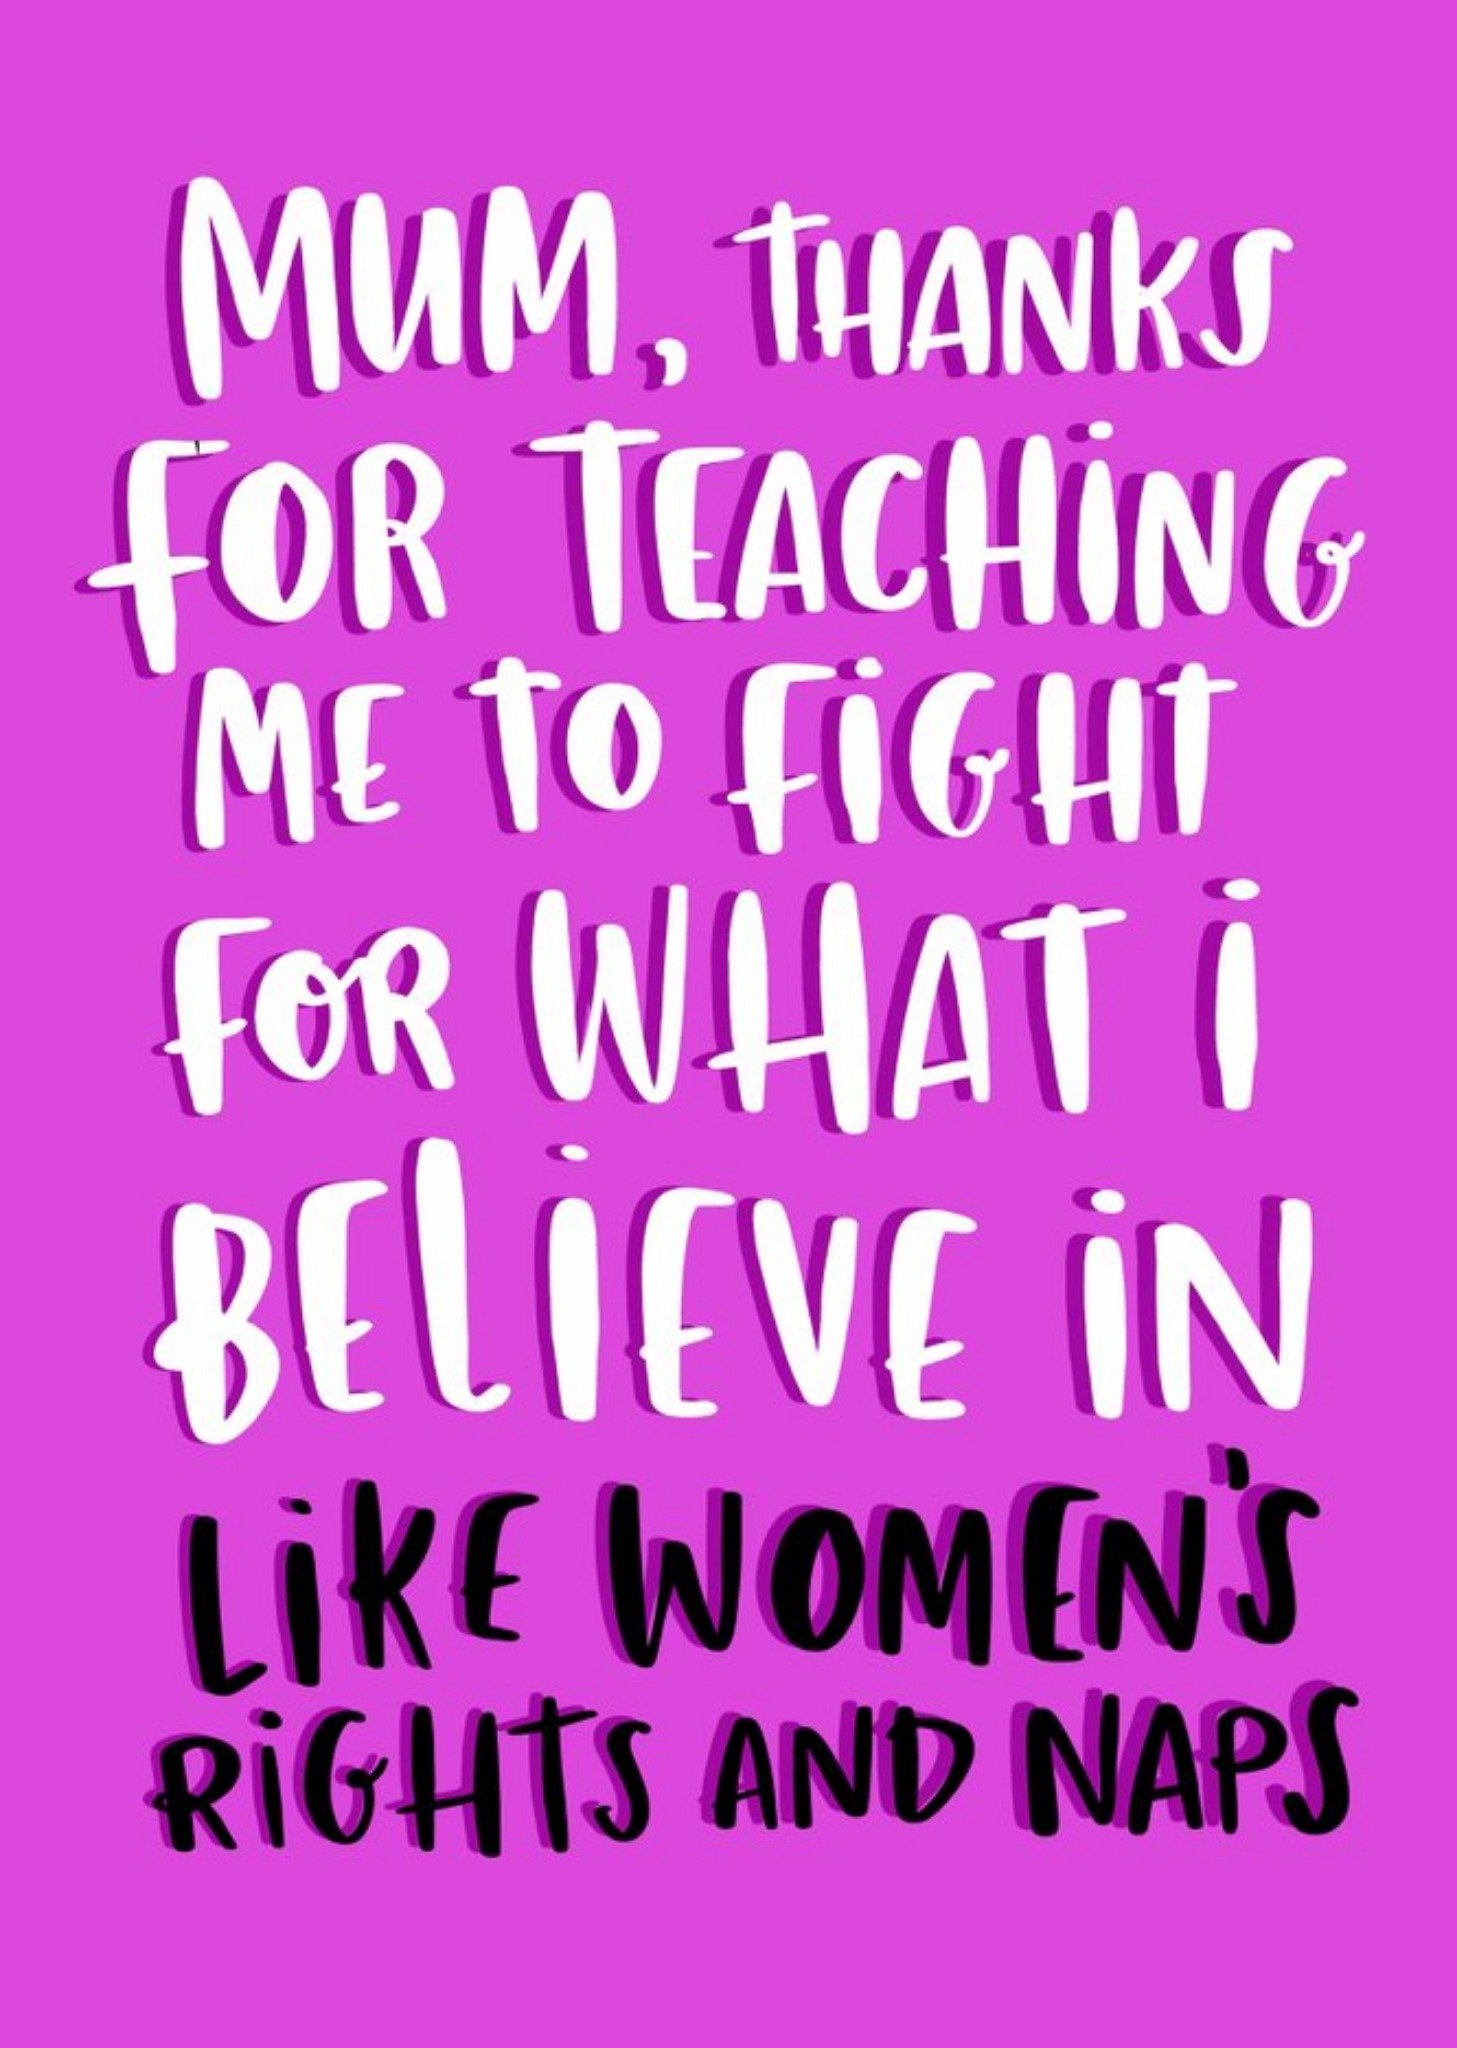 Moonpig Woman's Rights And Naps Mother's Day Card Ecard